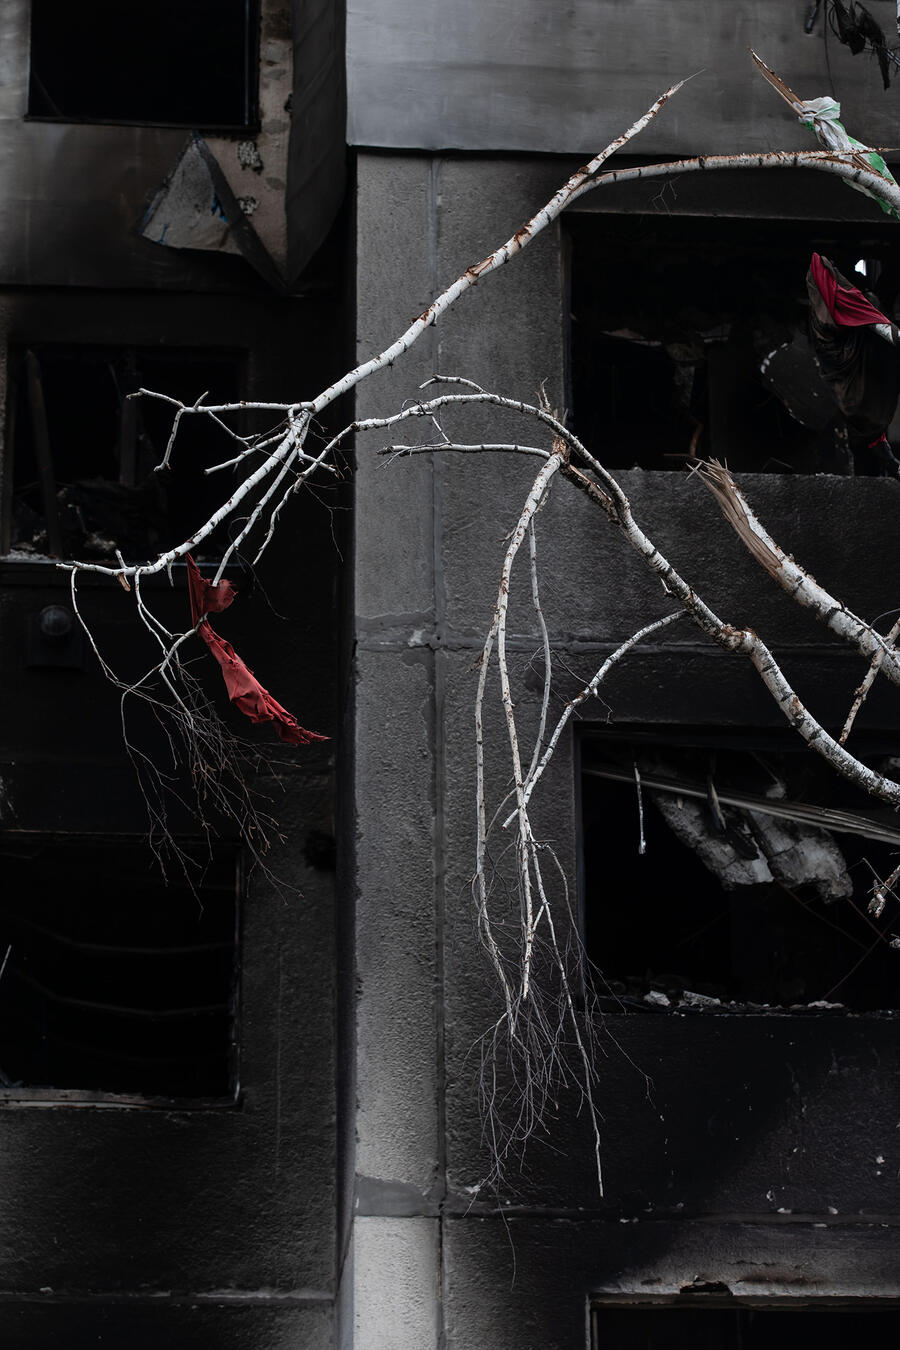 Mikhail Palinchak: Borodianka, 2022; image: broken birch branches in front of a burnt-out concrete facade, a dirty red cloth is caught at the end of one branch, color mood: dark, black-grey dominates